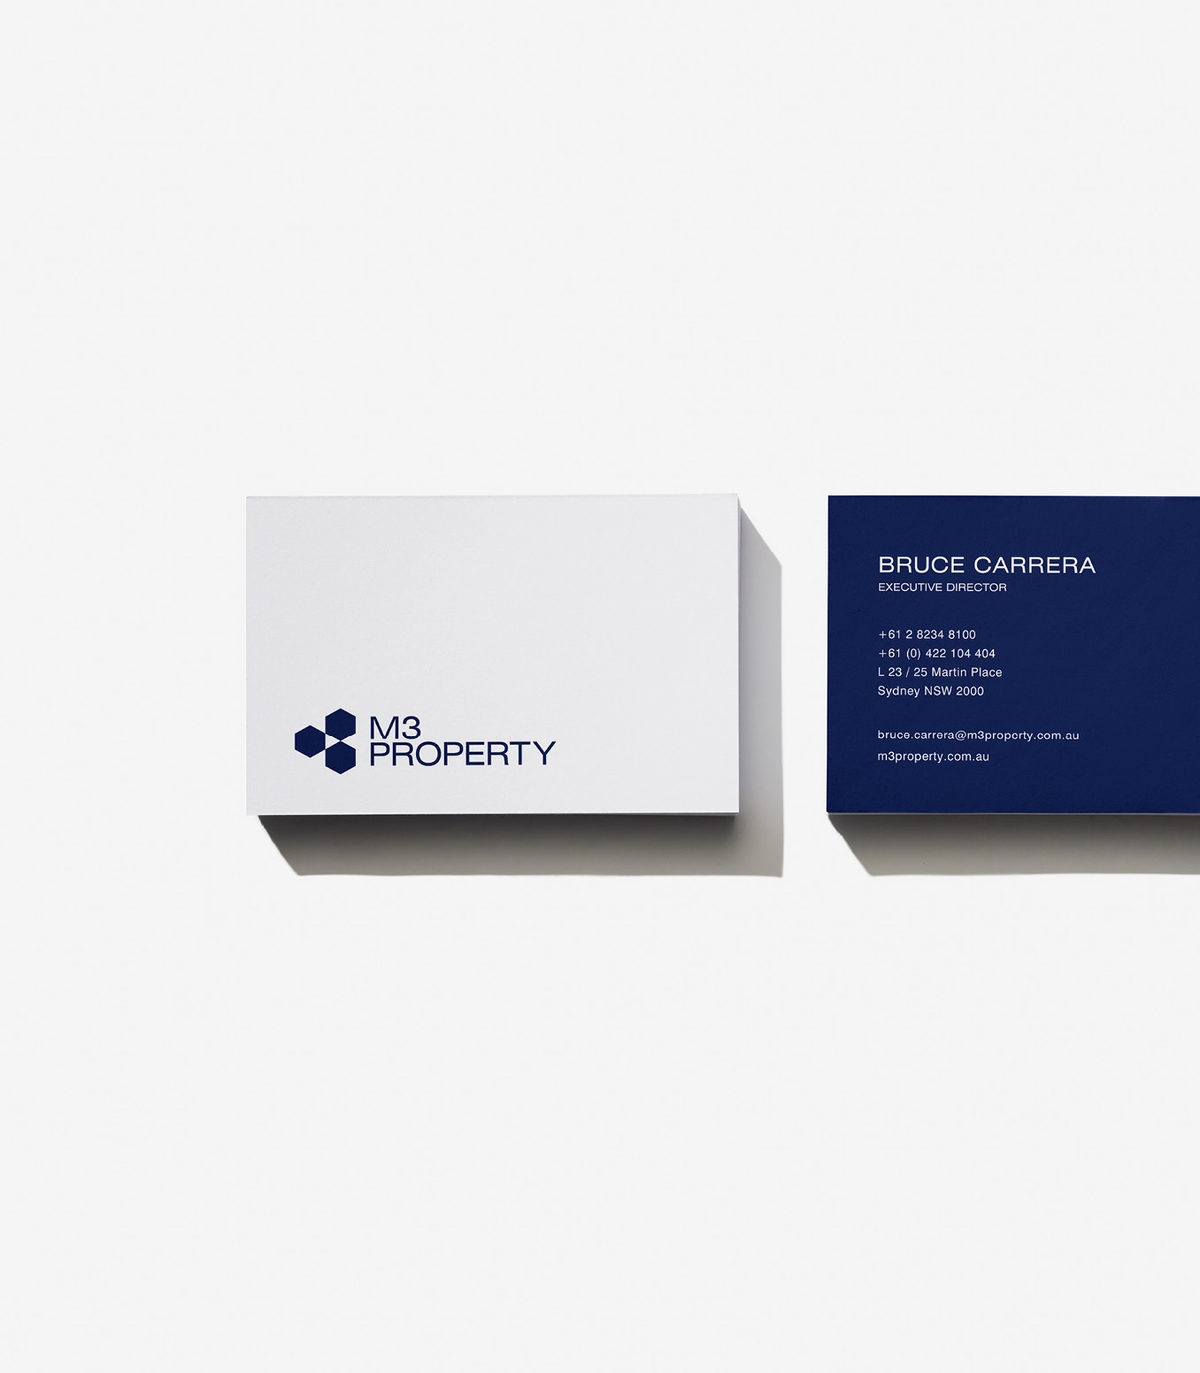 M3 Property - Brand and Website - Business Card Mockup | Atollon - a design company